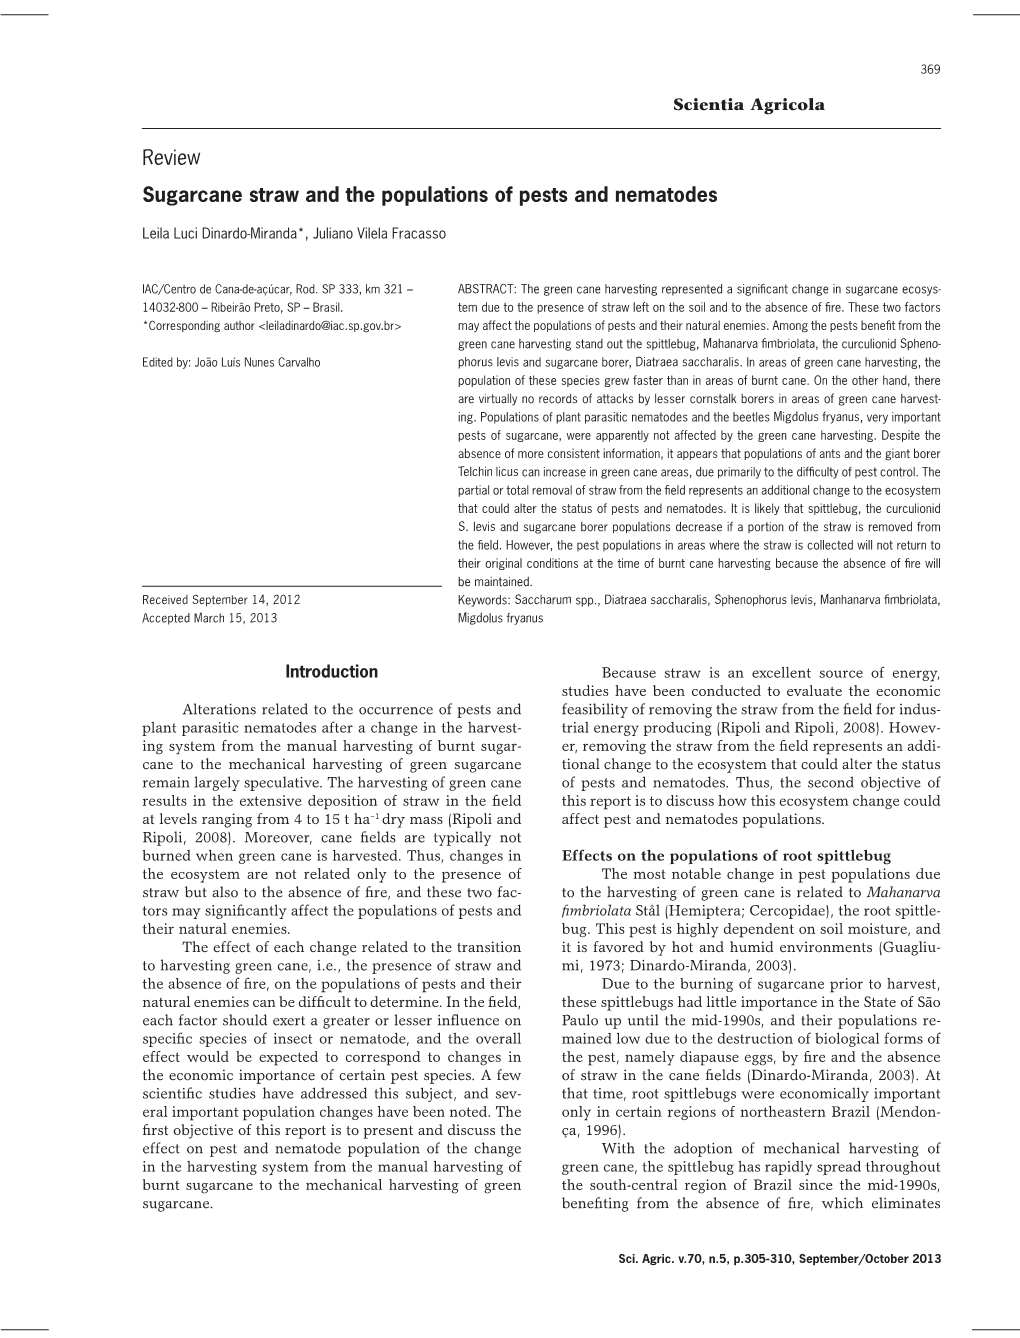 Sugarcane Straw and the Populations of Pests and Nematodes Review